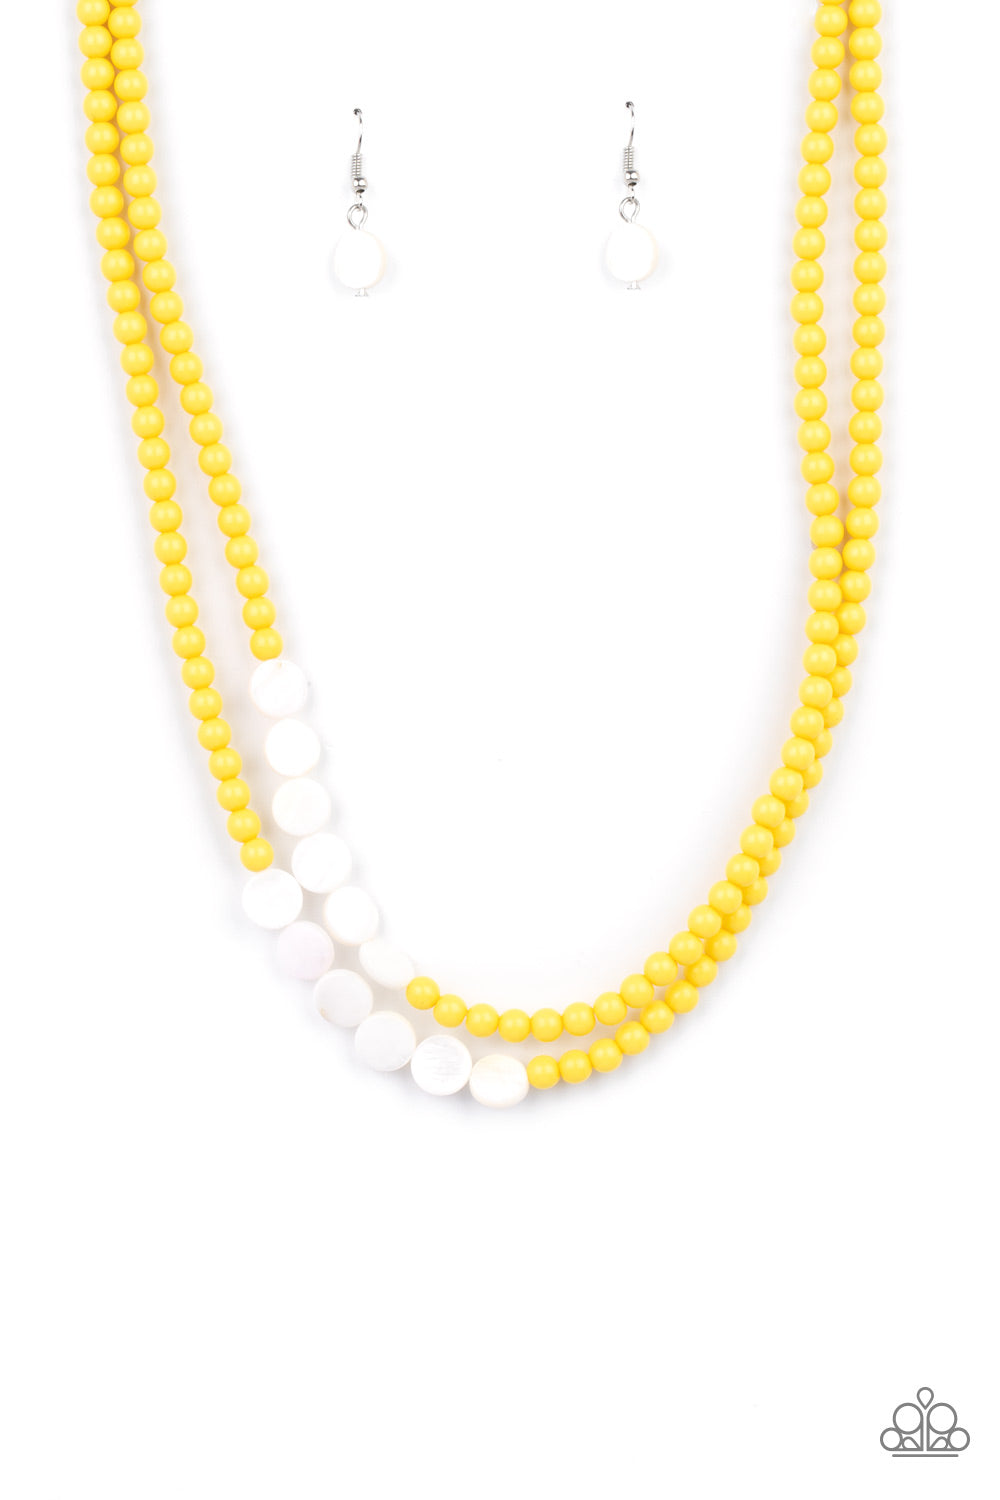 Paparazzi Accessories - A summery collection of shiny white shell-like discs and dainty yellow beads are threaded along invisible wires, creating colorful layers falling below the collar. Features an adjustable clasp closure.